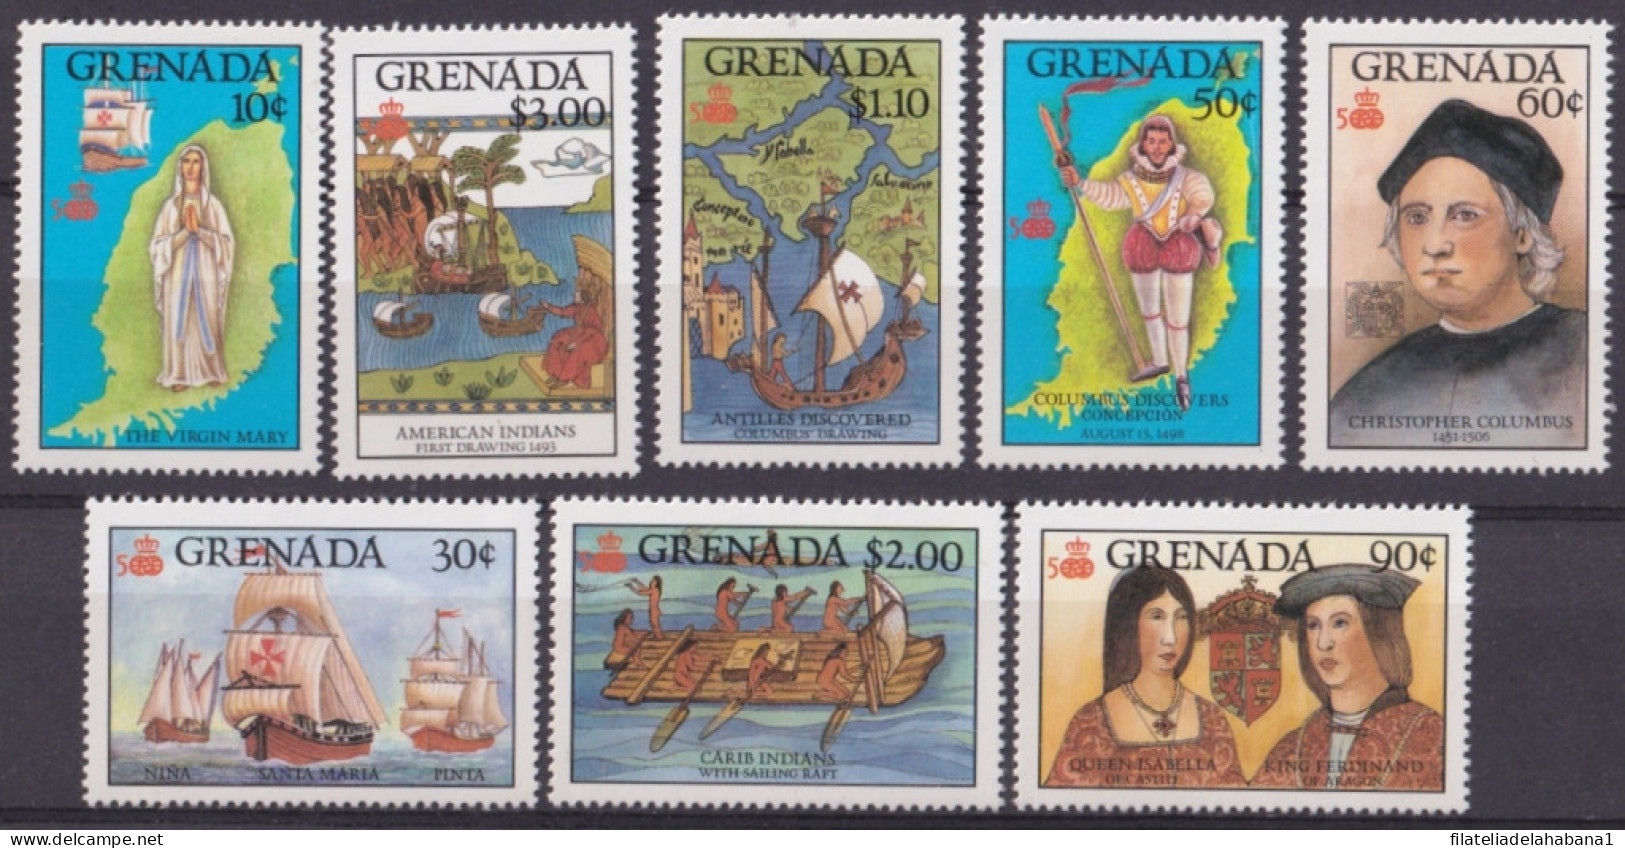 F-EX46970 GRENADA MNH 1987 OLD SHIP DISCOVERY COLUMBUS COLON.  - Christophe Colomb